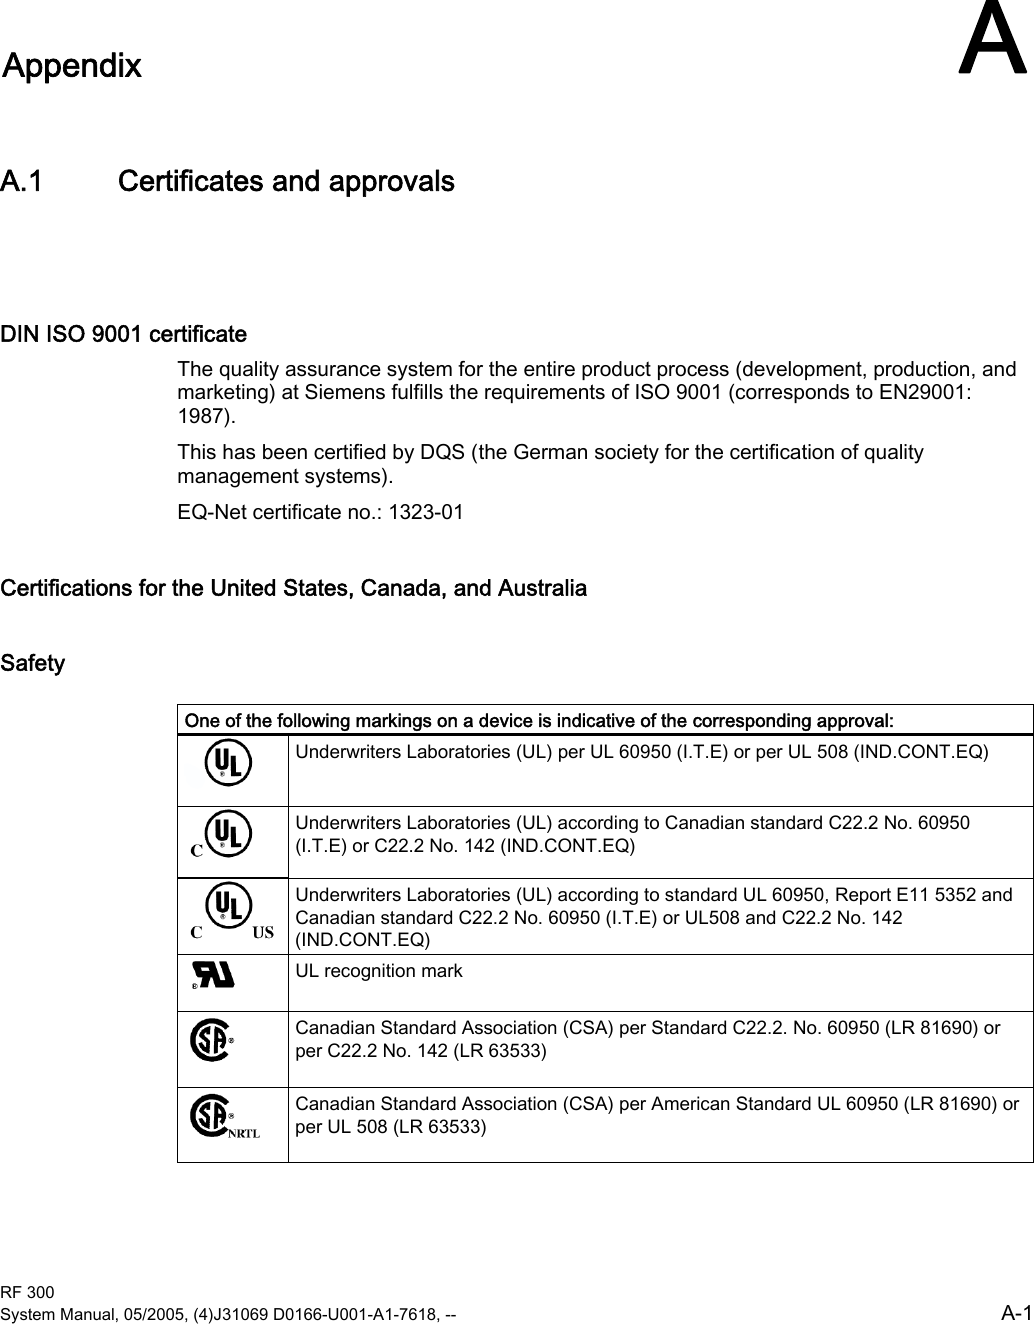  RF 300 System Manual, 05/2005, (4)J31069 D0166-U001-A1-7618, --  A-1 A Appendix  AA.1  A.1 Certificates and approvals  DIN ISO 9001 certificate The quality assurance system for the entire product process (development, production, and marketing) at Siemens fulfills the requirements of ISO 9001 (corresponds to EN29001: 1987). This has been certified by DQS (the German society for the certification of quality management systems). EQ-Net certificate no.: 1323-01 Certifications for the United States, Canada, and Australia Safety  One of the following markings on a device is indicative of the corresponding approval:  Underwriters Laboratories (UL) per UL 60950 (I.T.E) or per UL 508 (IND.CONT.EQ)  Underwriters Laboratories (UL) according to Canadian standard C22.2 No. 60950 (I.T.E) or C22.2 No. 142 (IND.CONT.EQ)  Underwriters Laboratories (UL) according to standard UL 60950, Report E11 5352 and Canadian standard C22.2 No. 60950 (I.T.E) or UL508 and C22.2 No. 142 (IND.CONT.EQ)  UL recognition mark  Canadian Standard Association (CSA) per Standard C22.2. No. 60950 (LR 81690) or per C22.2 No. 142 (LR 63533)  Canadian Standard Association (CSA) per American Standard UL 60950 (LR 81690) or per UL 508 (LR 63533) 